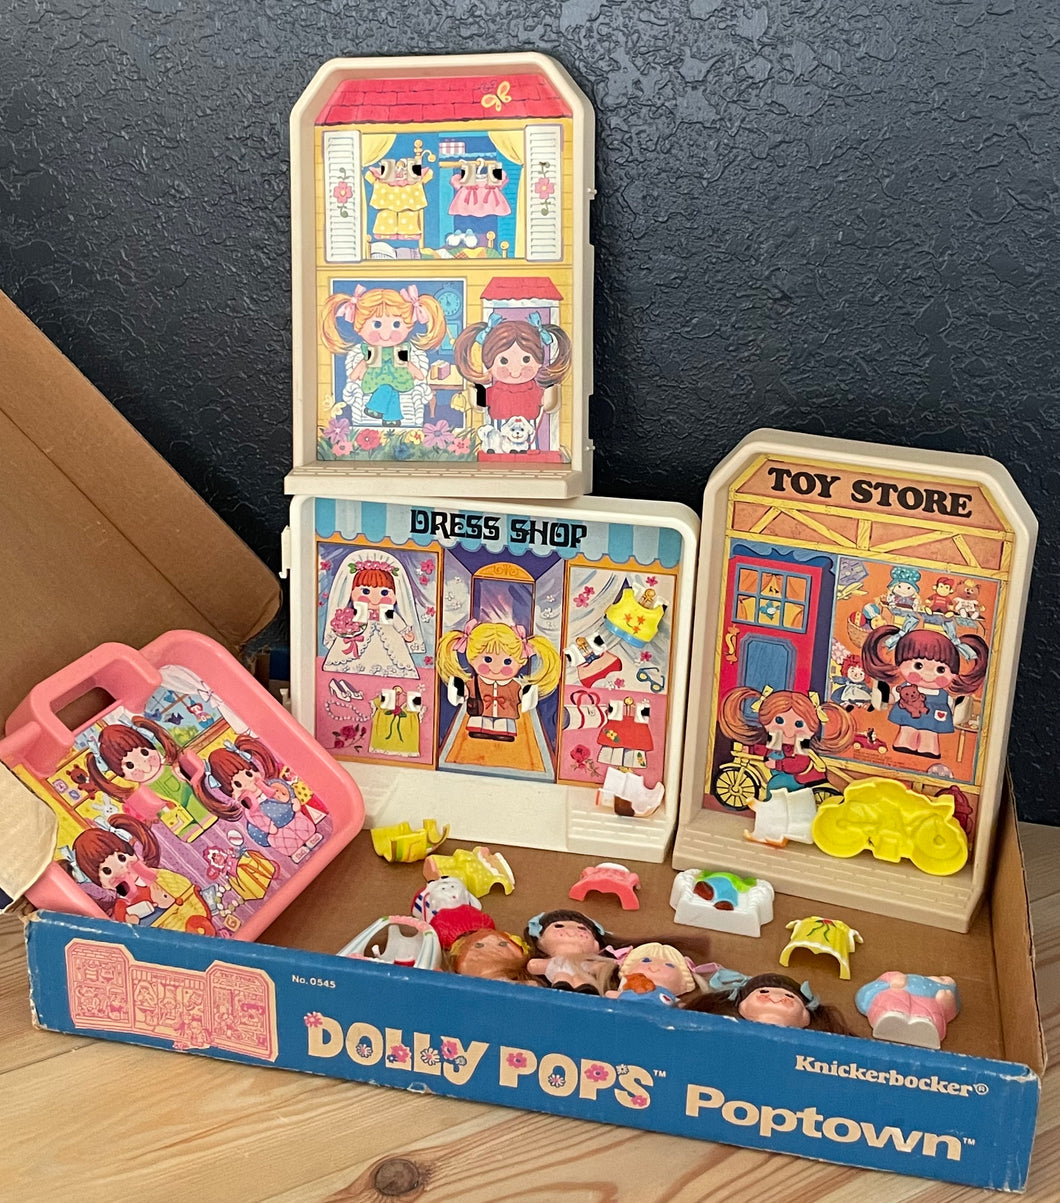 Vintage 1978 Dolly Pops Poptown & Taking Care of Baby Play Sets with original Box